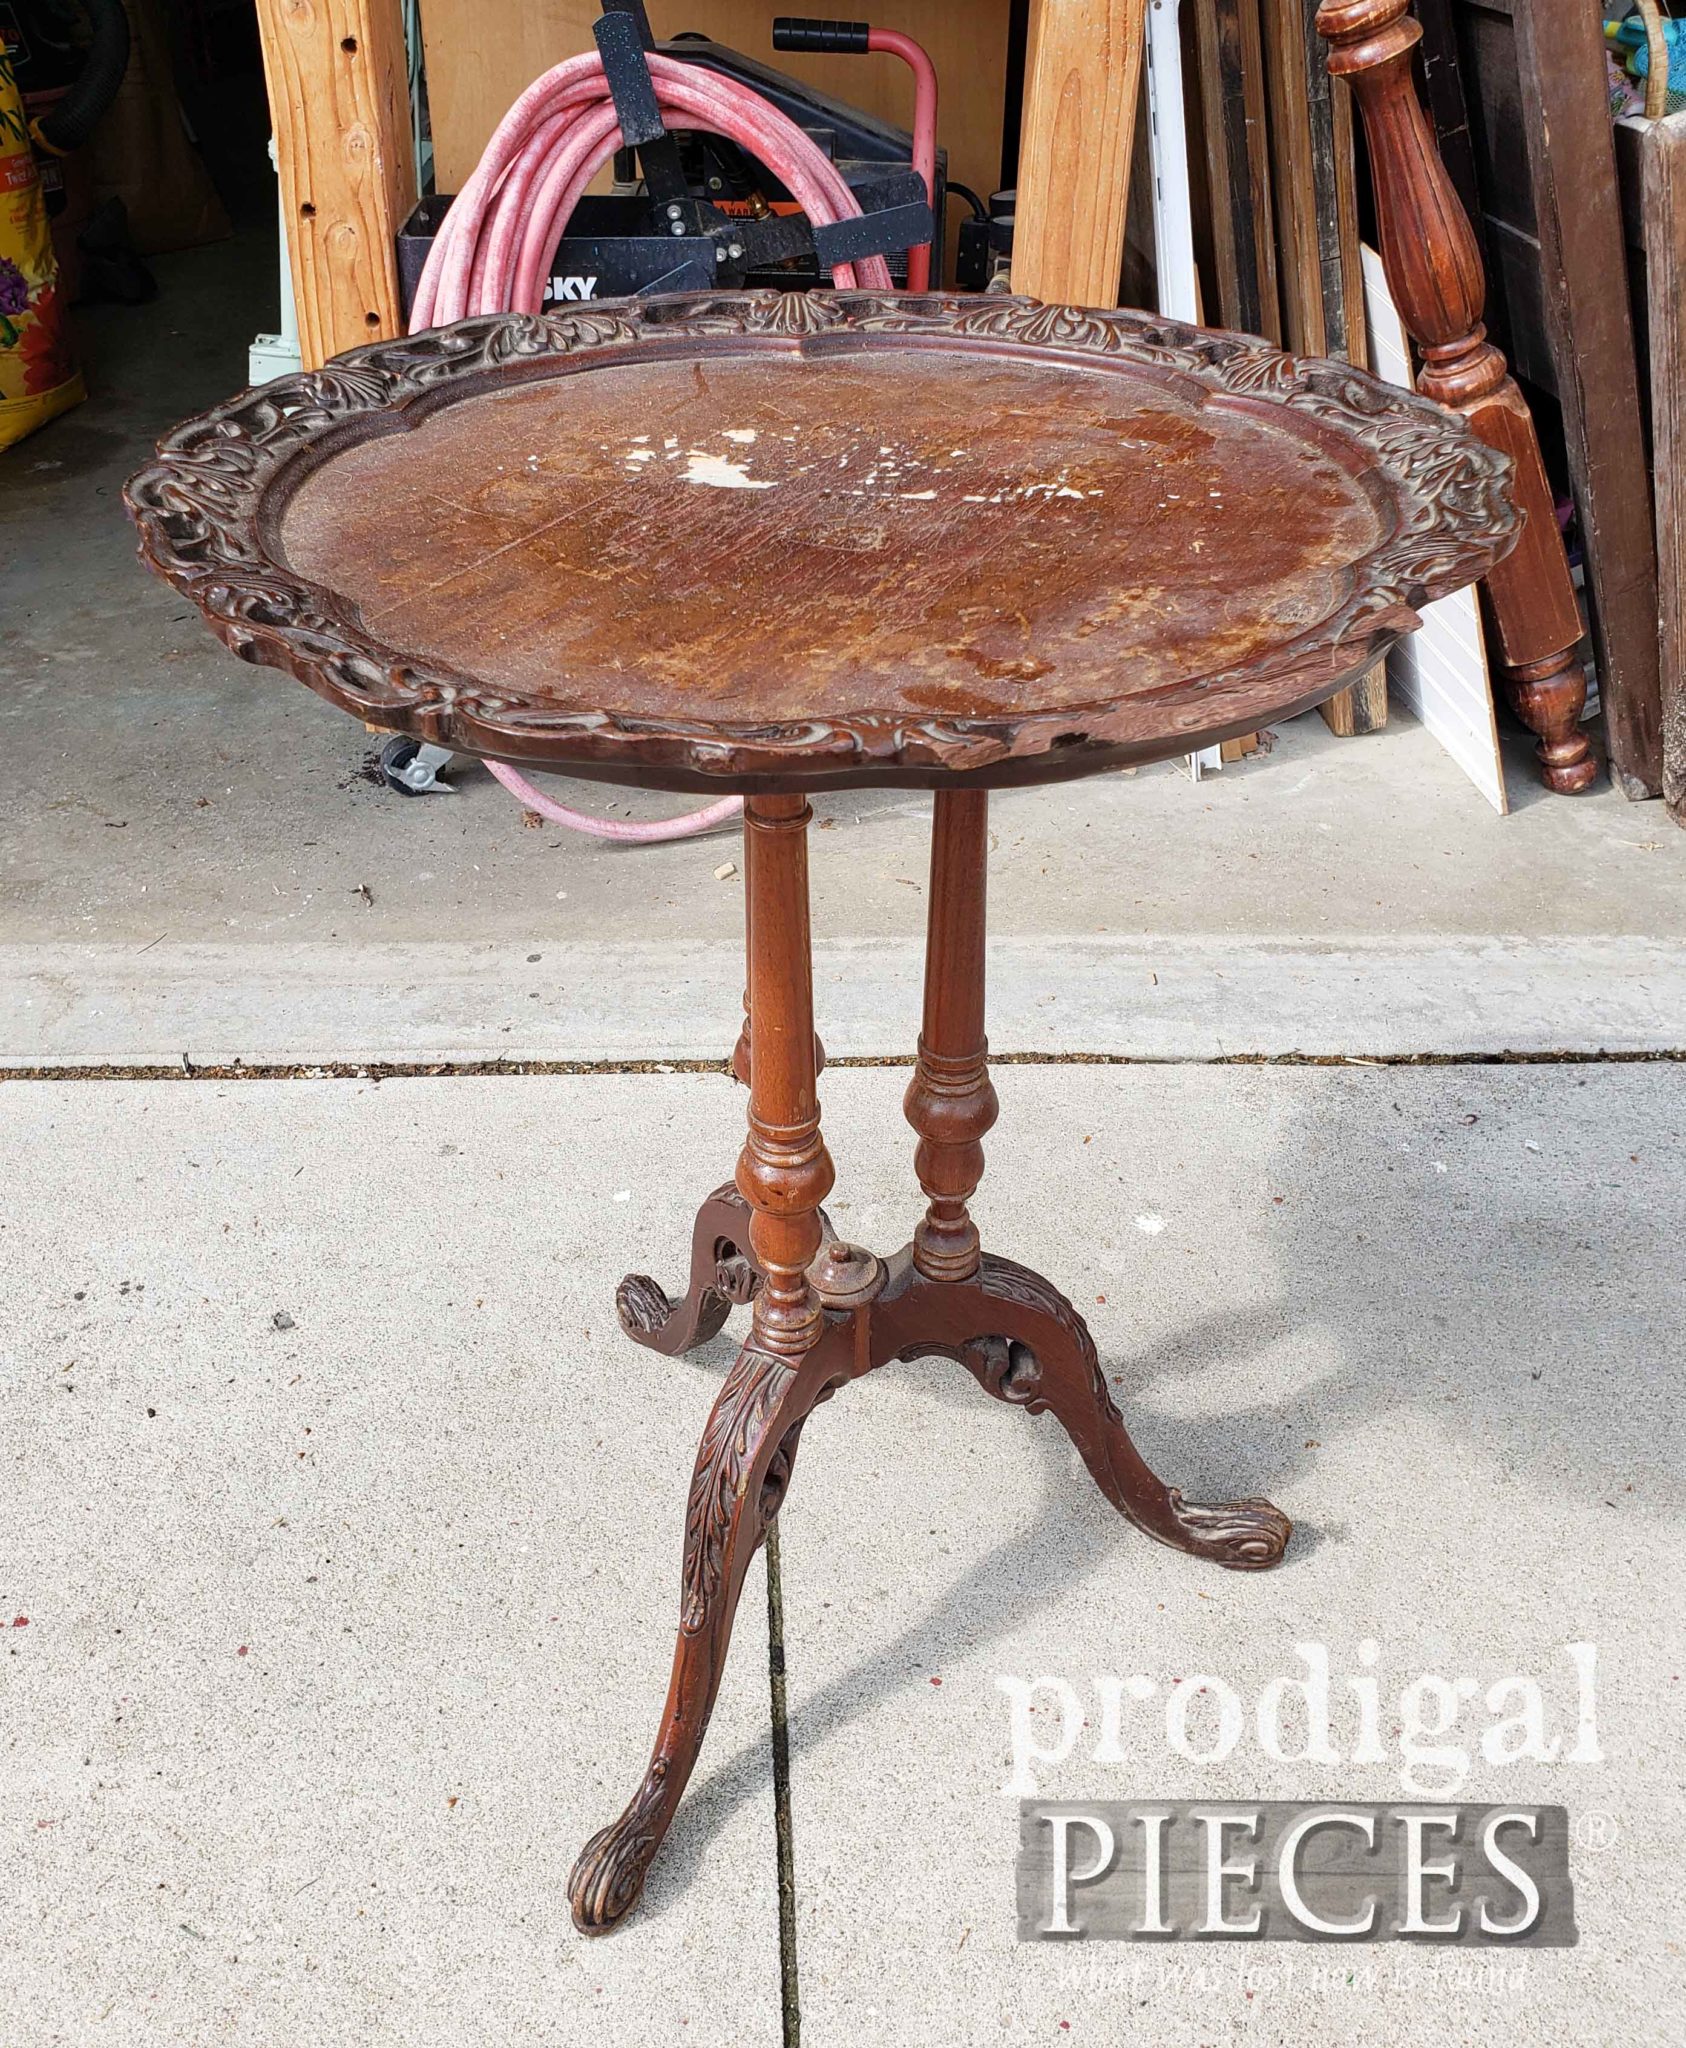 Curbside Find #trashure Antique Pie Crust Table with Damage | Saved by Larissa of Prodigal Pieces | prodigalpieces.com